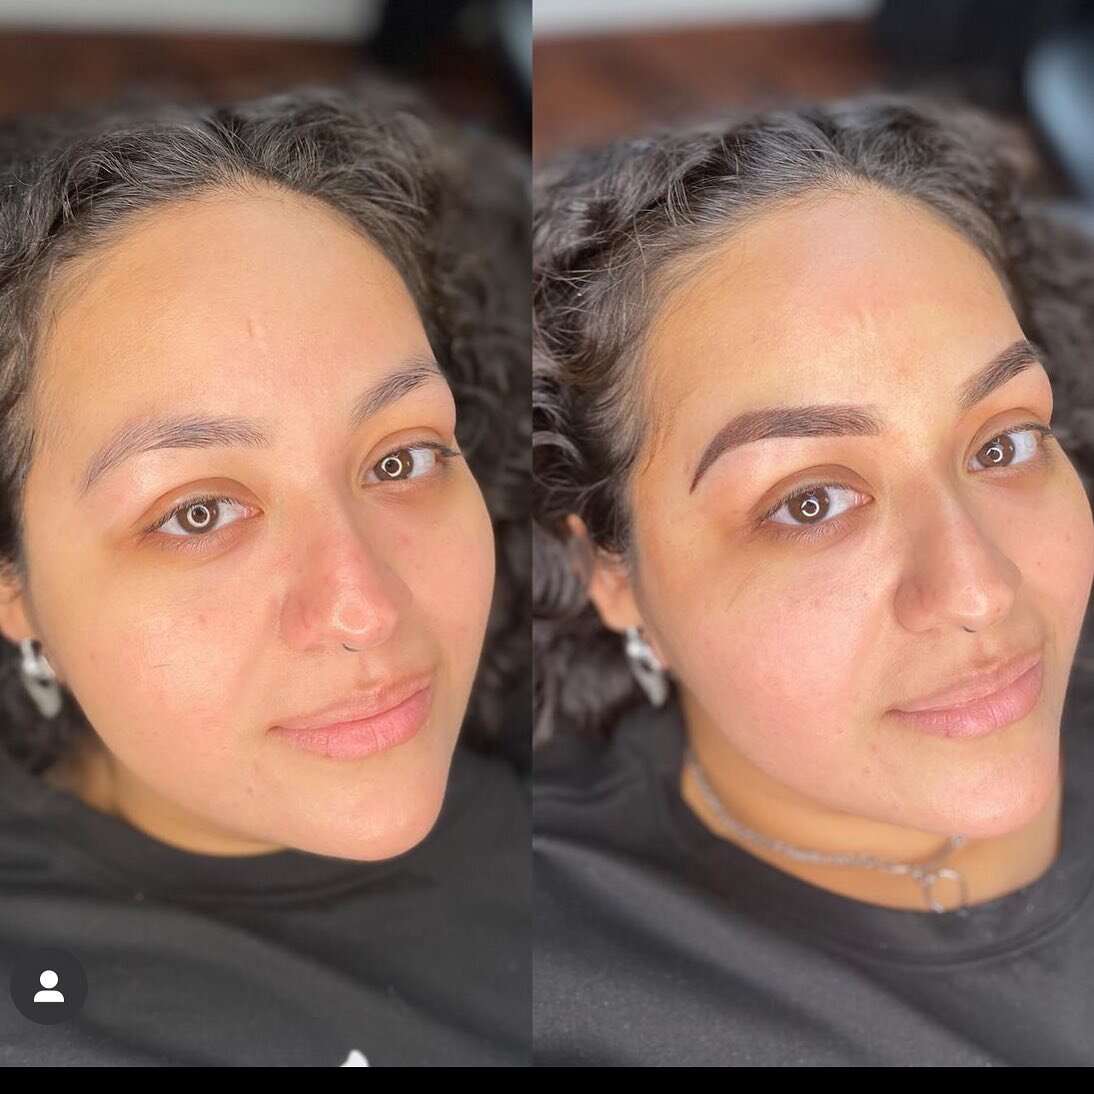 Another day, another beautiful transformation ☺️😍😍
.
.
.
Service: Powder Brows
Artist: @ombrowschicago 
Pigment: @permablend_pigments x @tinadaviesprofessional 
Cost: $450
Location: 3200 N Milwaukee Ave. Chicago, IL
Services, Pre/Post Care, &amp; B